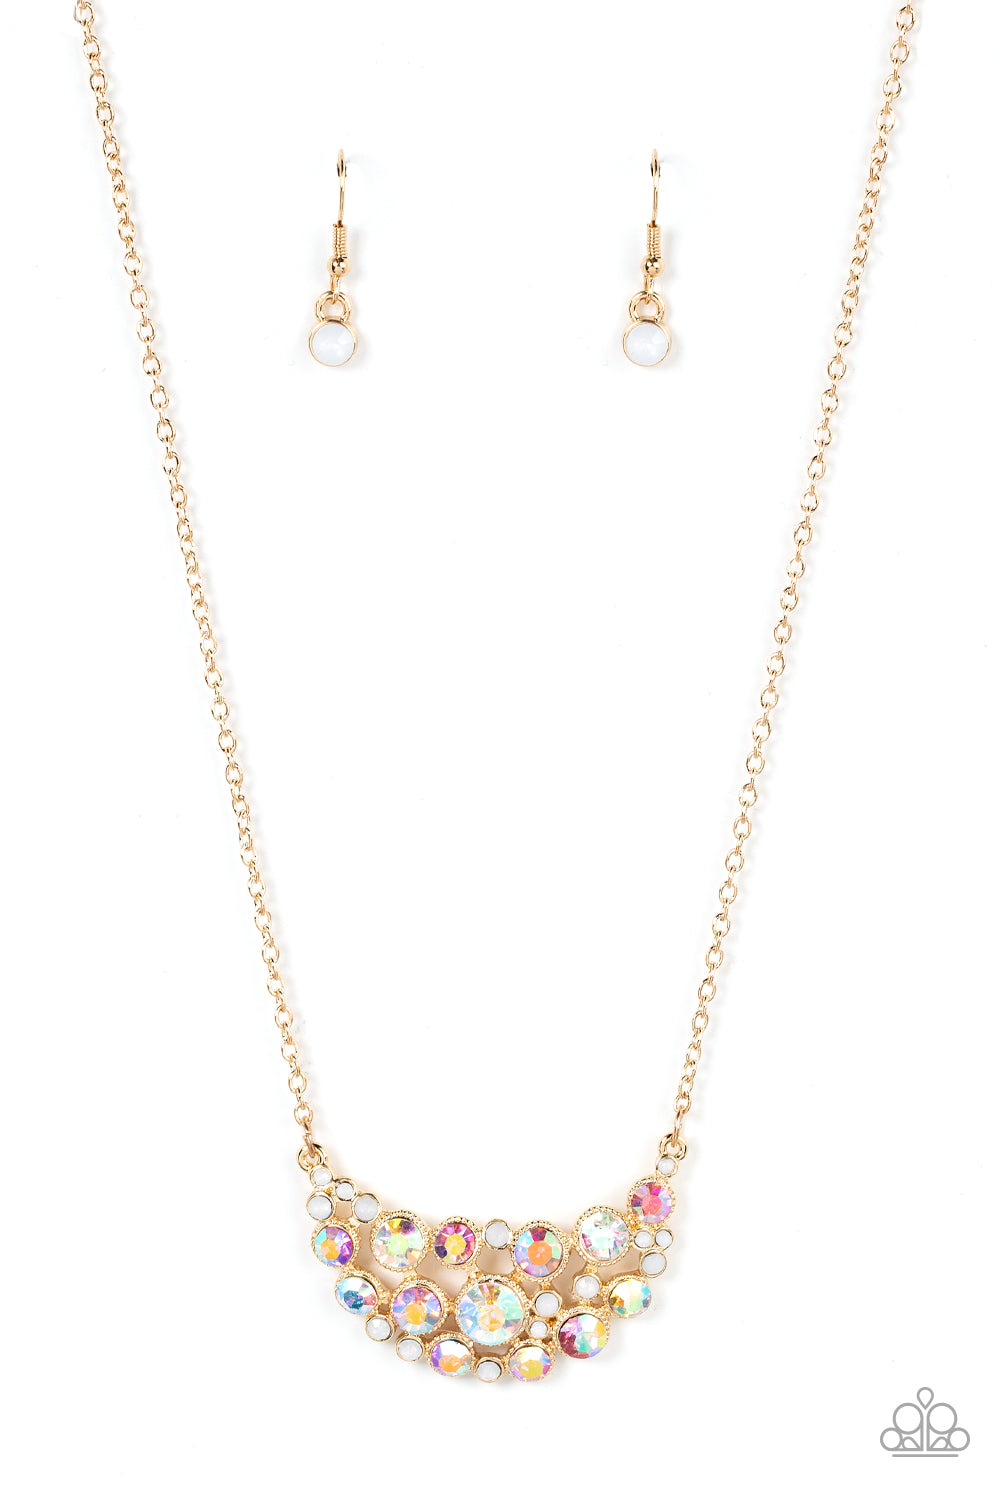 Effervescently Divine - Gold Dainty Chain/Opal & Iridescent Rhinestone Pendant Paparazzi Necklace & matching earrings